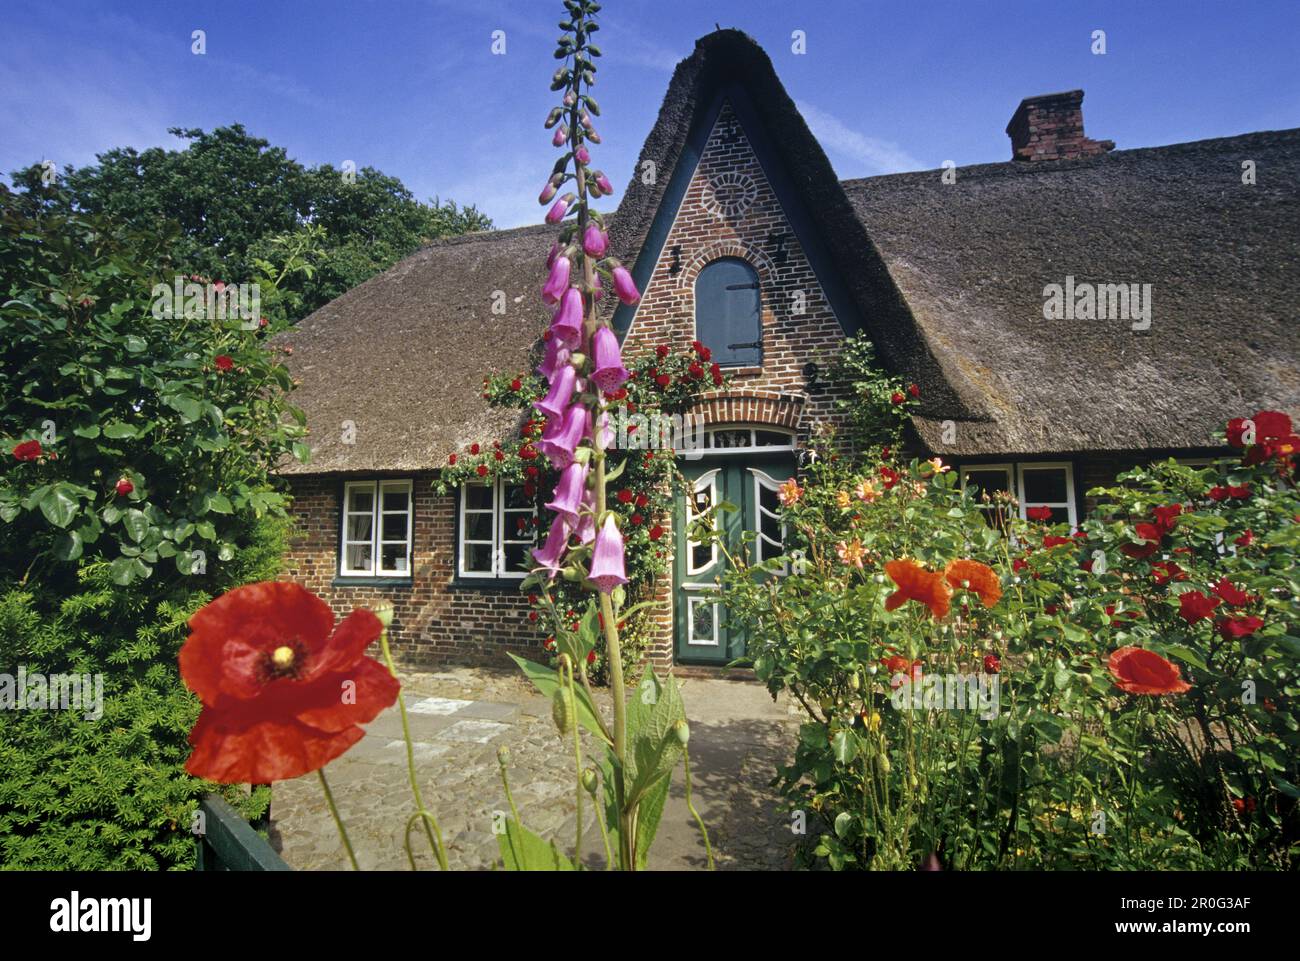 Typical house with thatched roof and flower garden at Keitum, Sylt island, North Friesland, Schleswig-Holstein, Germany Stock Photo